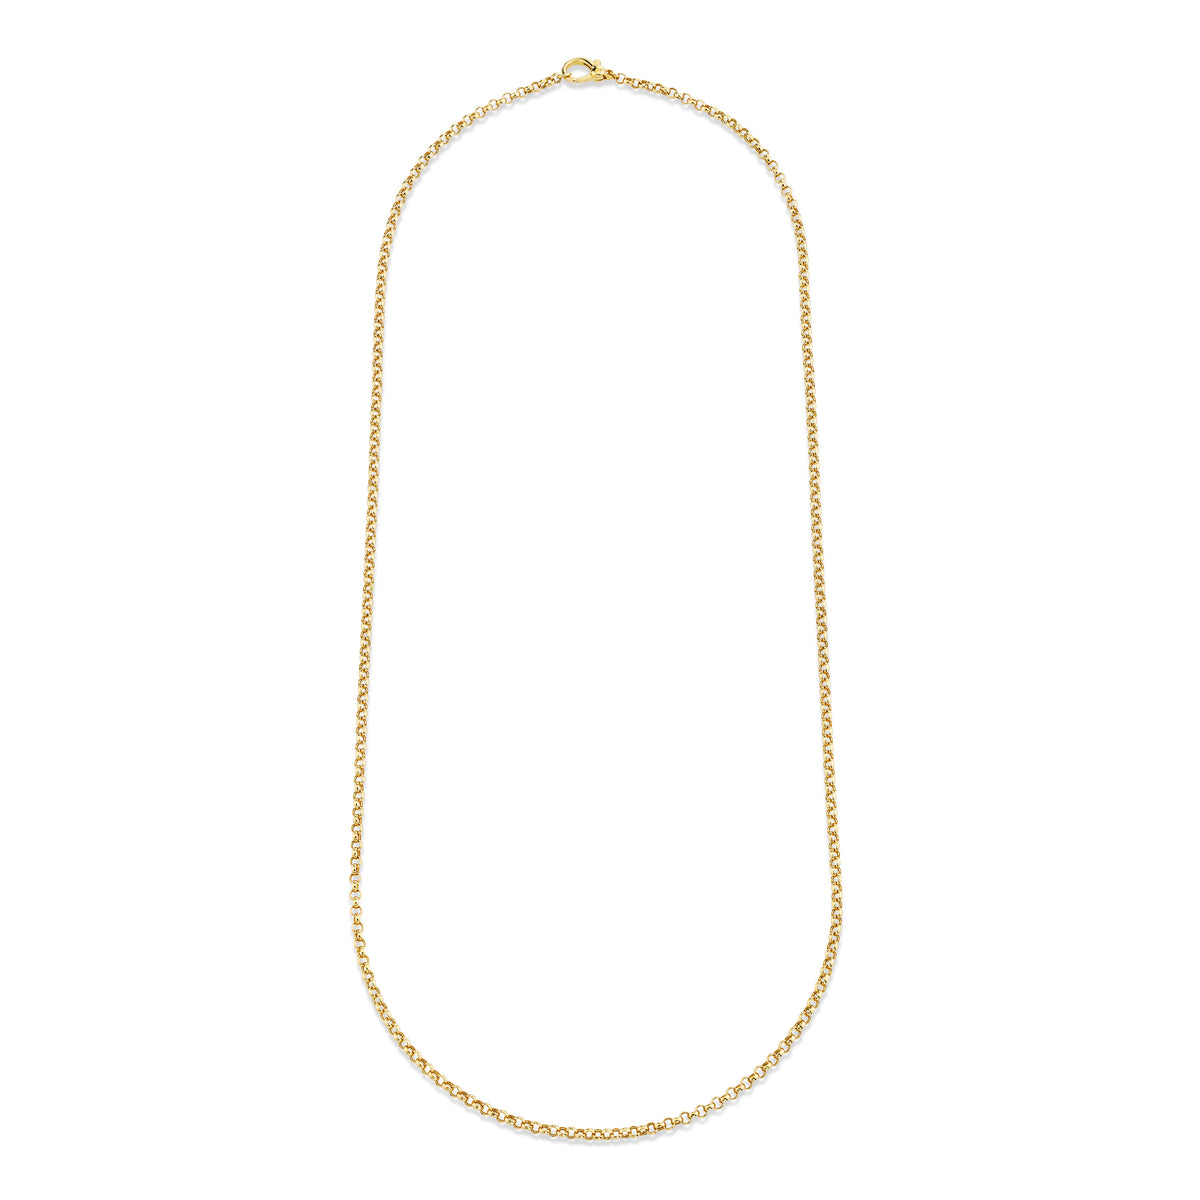 MEN'S SOLID GOLD ROLO CHAIN